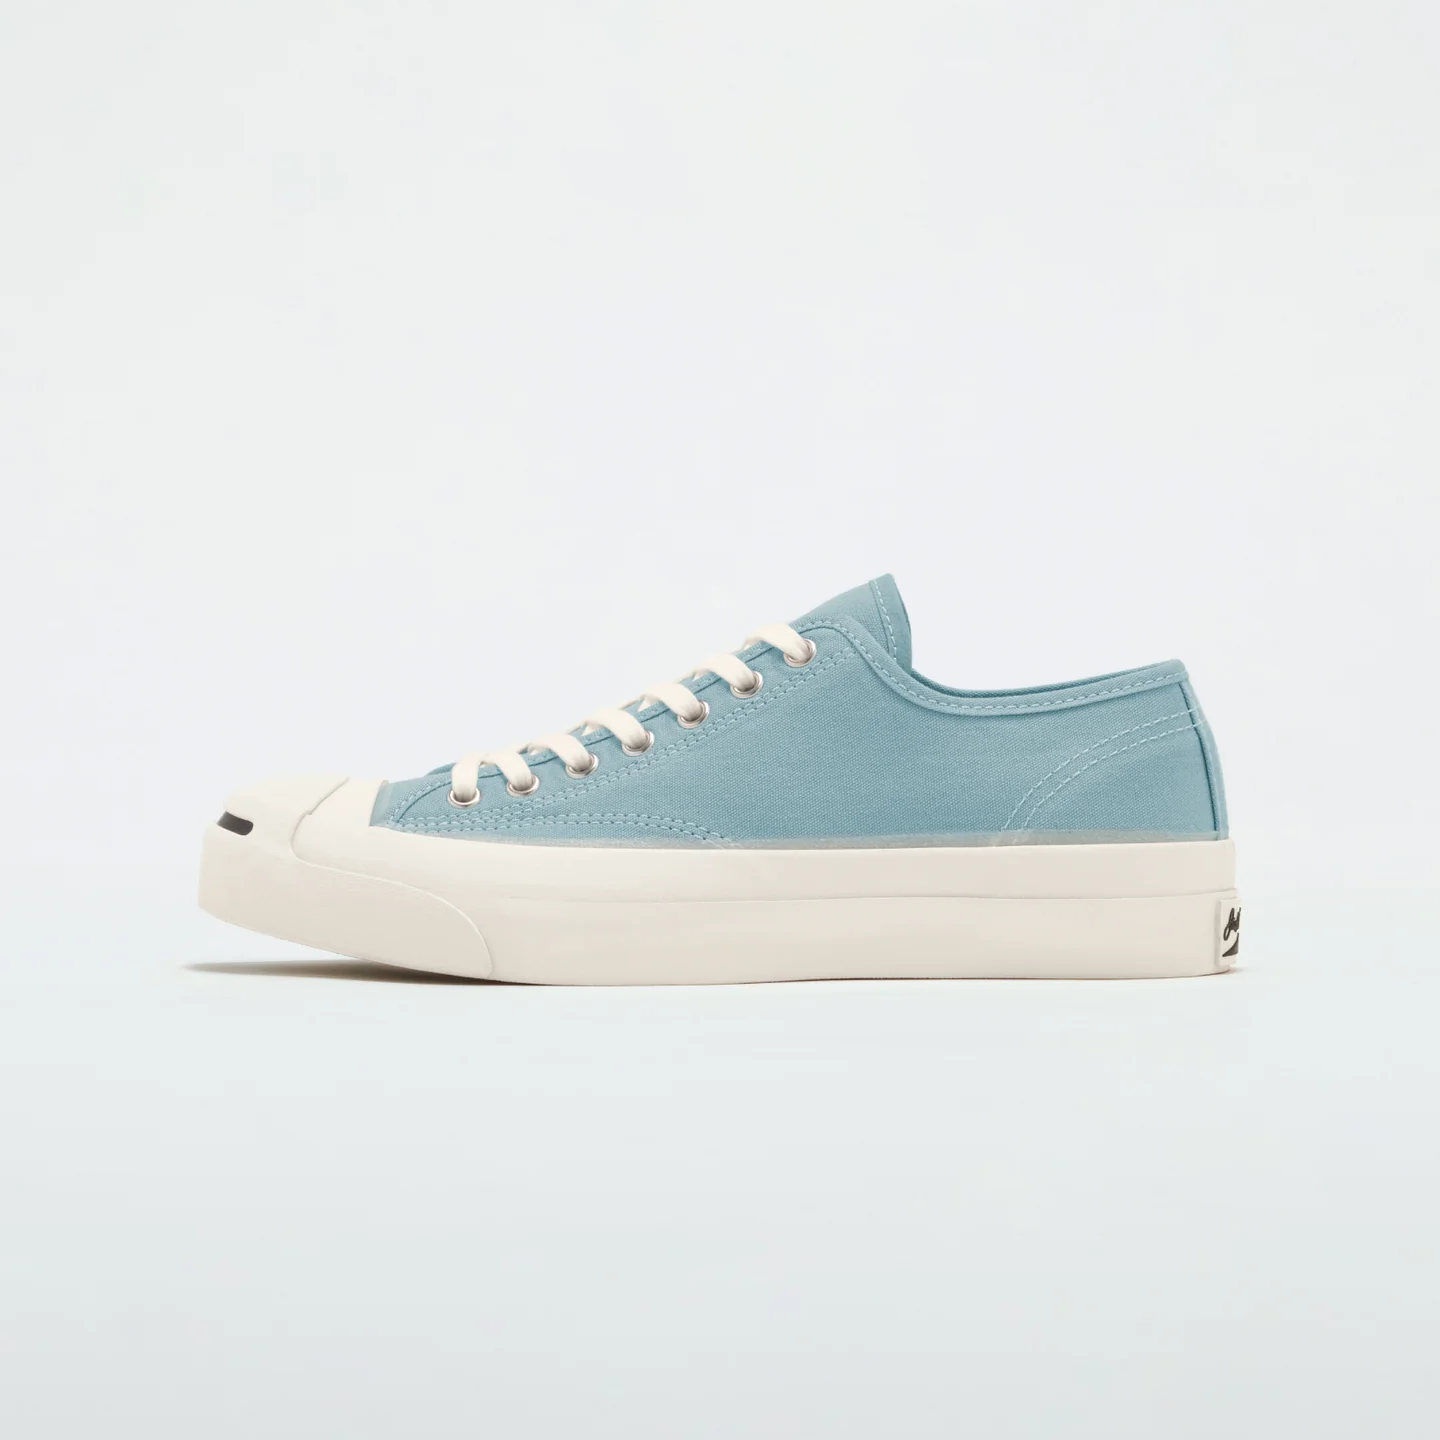 JACK PURCELL CANVAS - LT.BLUE